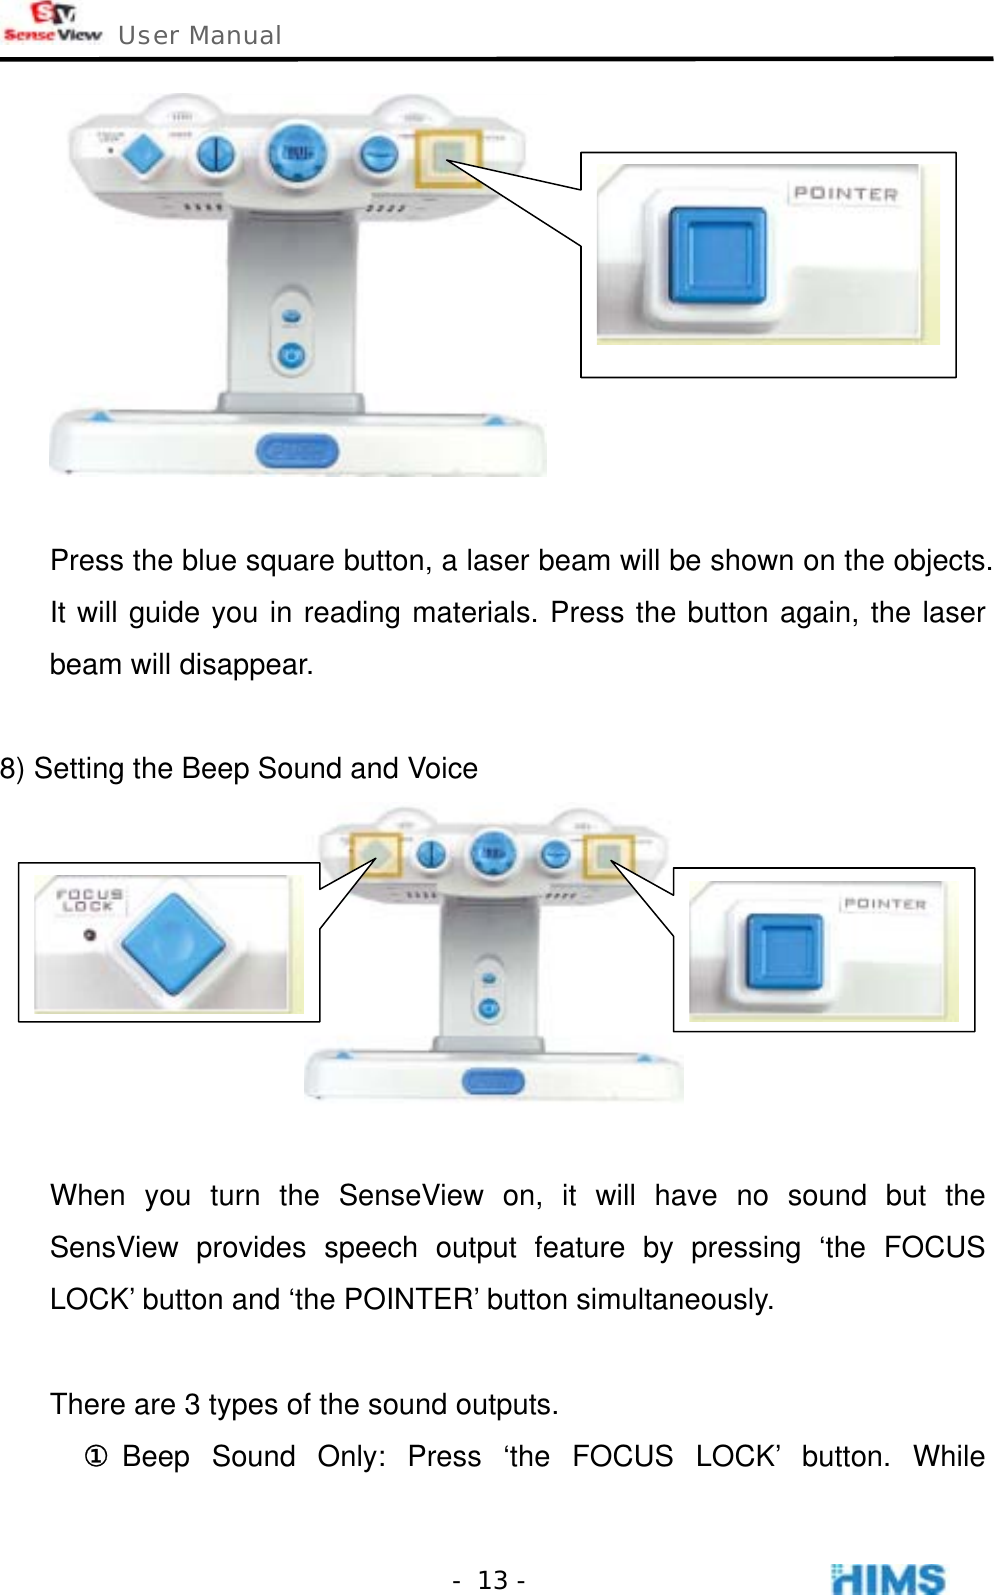  User Manual    - 13 -  Press the blue square button, a laser beam will be shown on the objects. It will guide you in reading materials. Press the button again, the laser beam will disappear.  8) Setting the Beep Sound and Voice   When you turn the SenseView on, it will have no sound but the SensView provides speech output feature by pressing ‘the FOCUS LOCK’ button and ‘the POINTER’ button simultaneously.  There are 3 types of the sound outputs.   ① Beep Sound Only: Press ‘the FOCUS LOCK’ button. While 